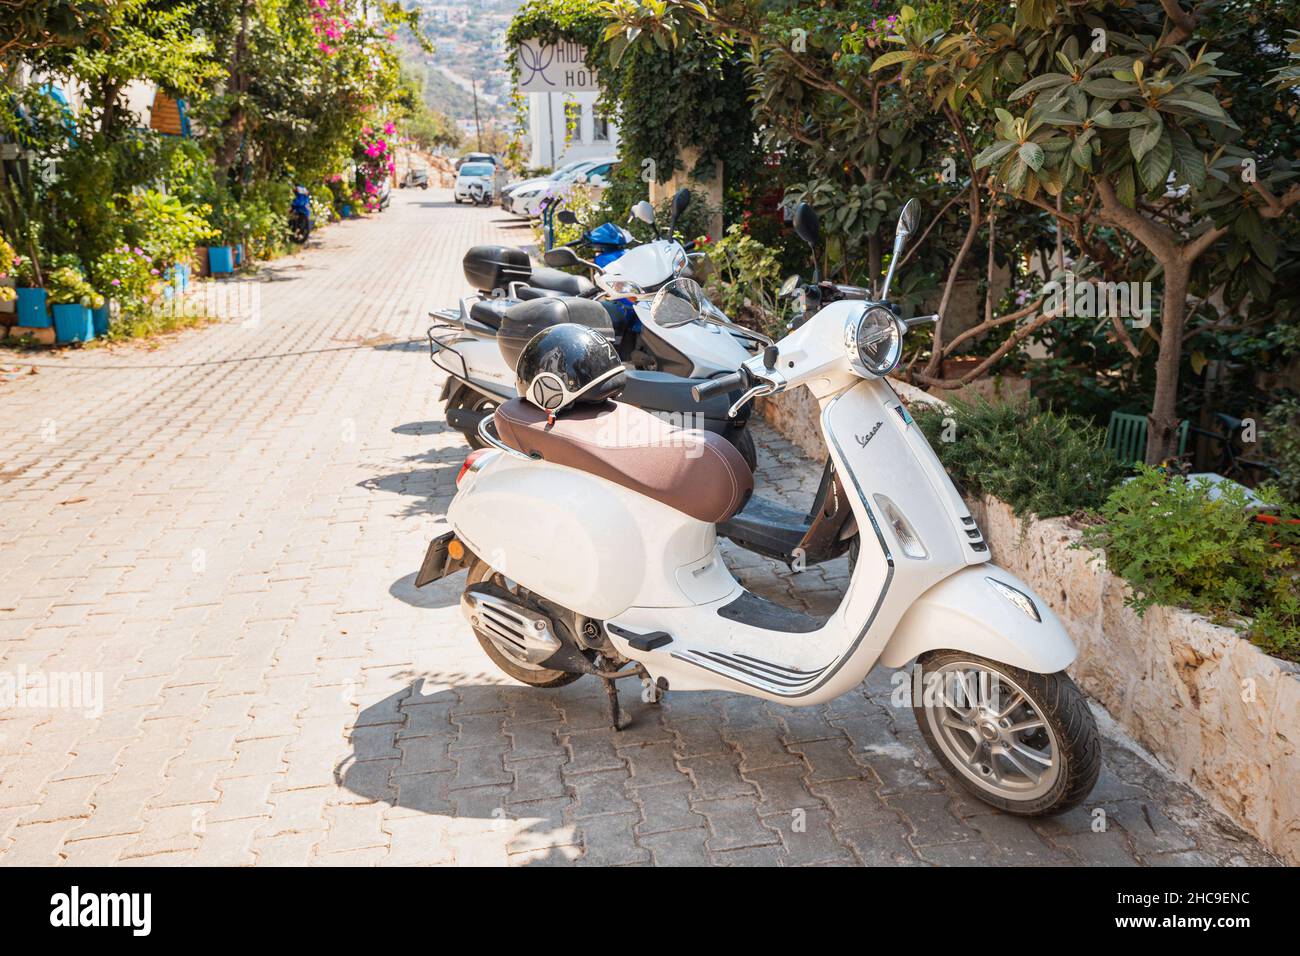 28 August 2021, Kas, Turkey; Vespa motorcycle scooter parked at city street Stock Photo